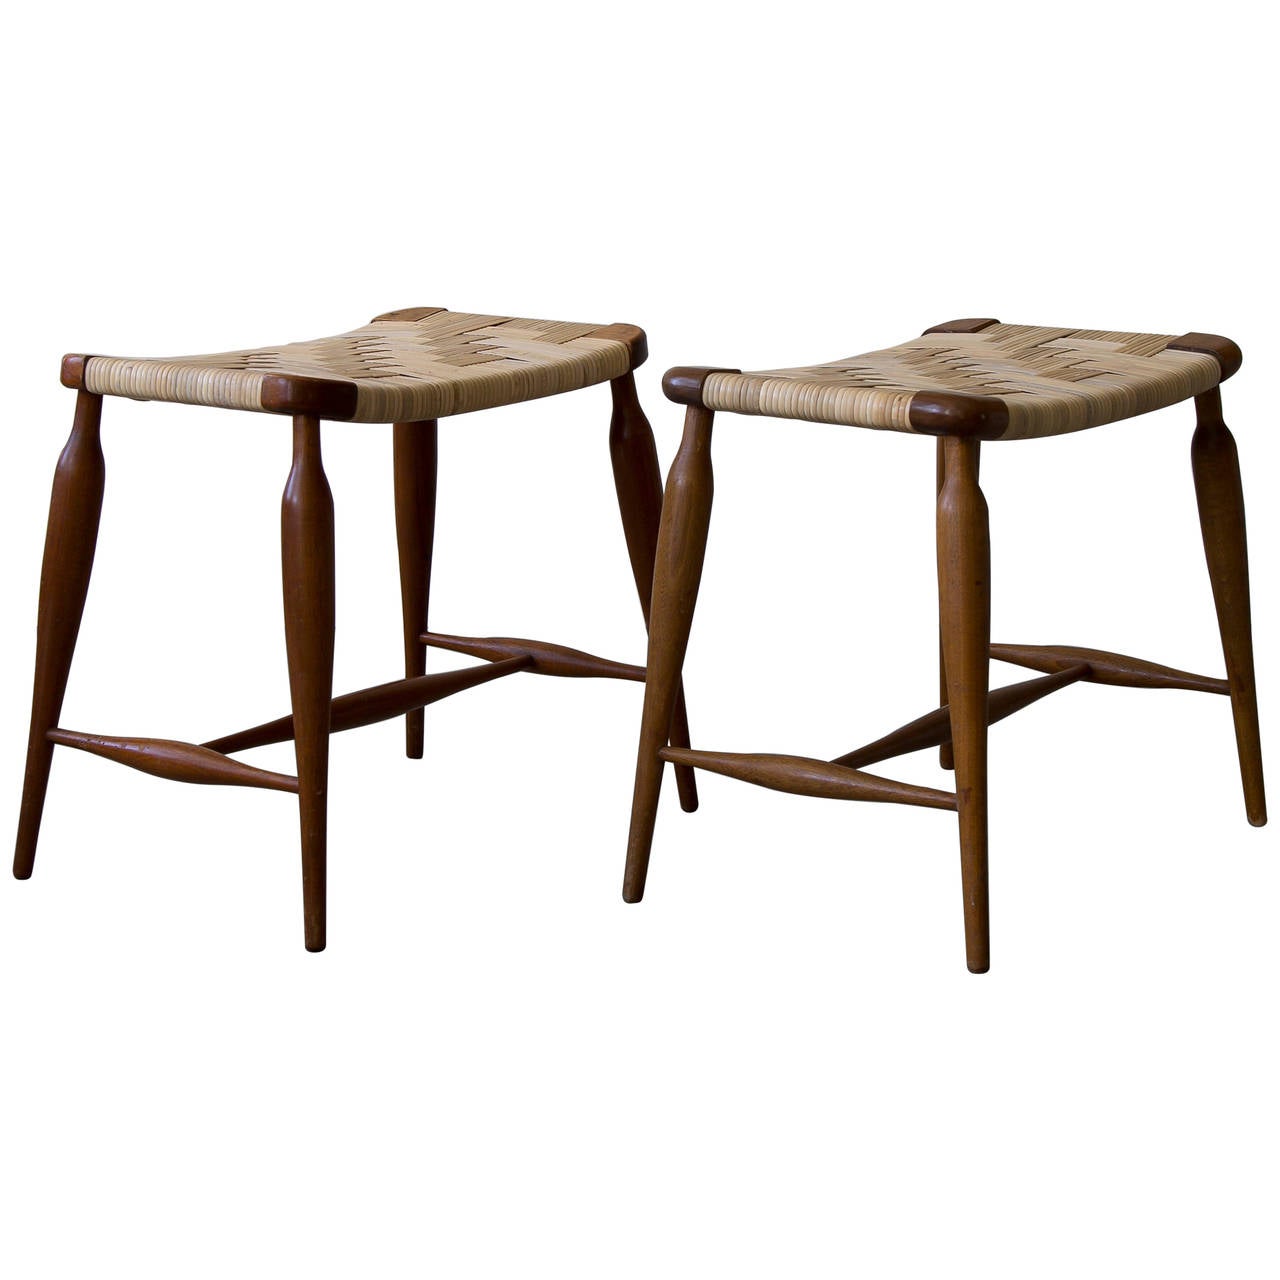 Josef Frank, pair of mahogany and cane stools, model 967. 

Sweden, circa 1940s.

Early edition from late 1940s by Firma Svenskt Tenn, Sweden.